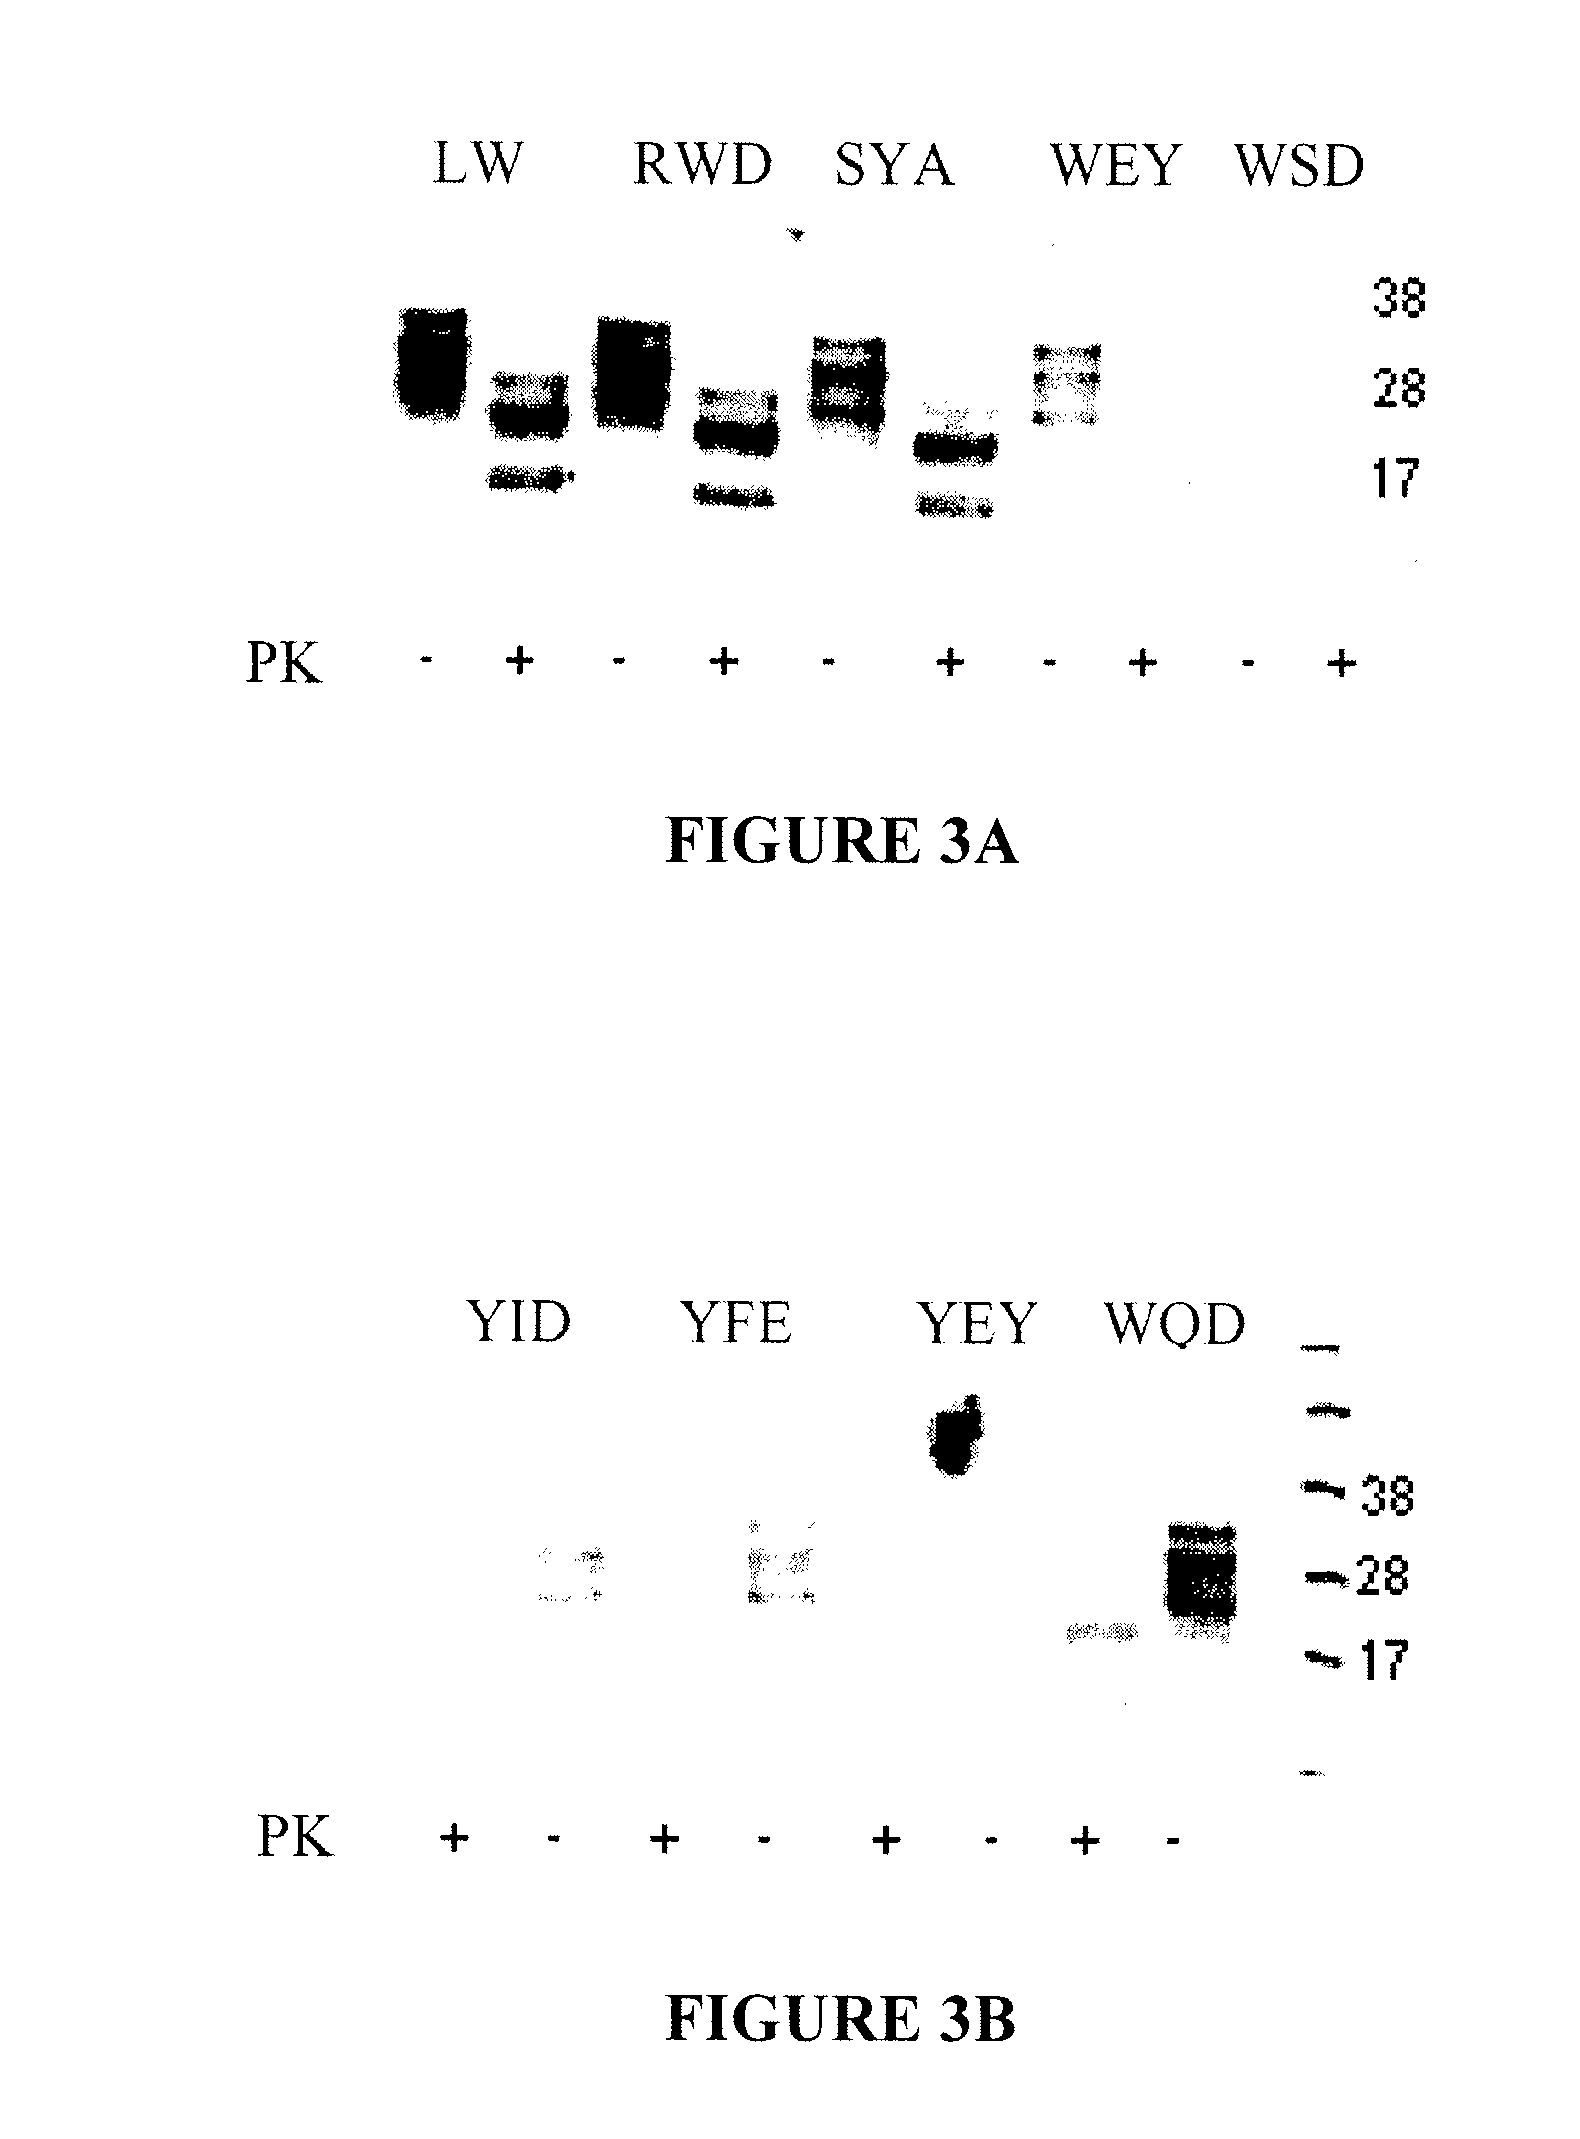 Prion protein ligands and methods of use